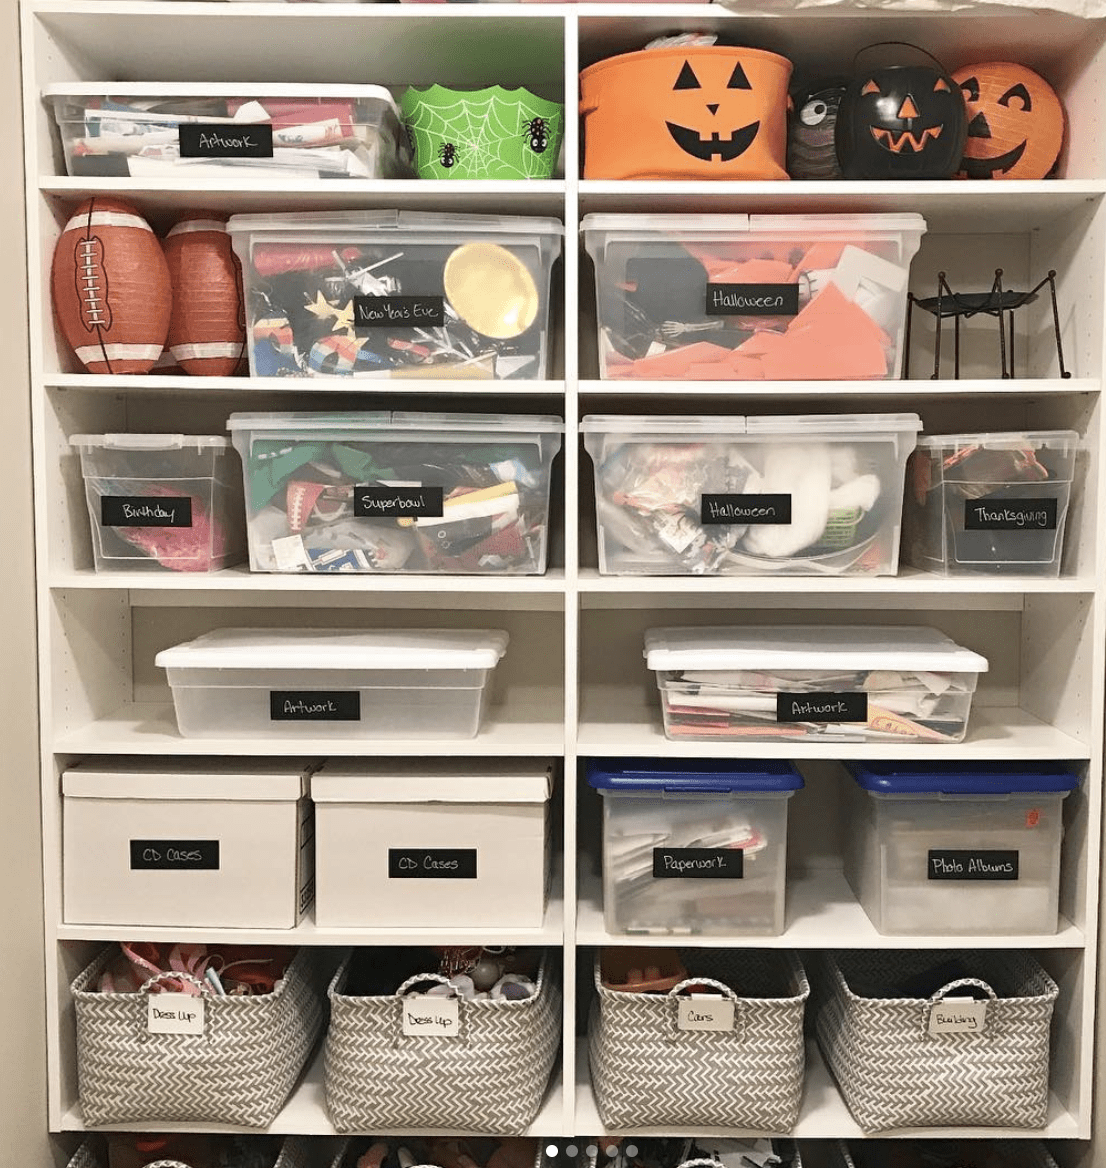 shelving unit in basement with plastic storage totes